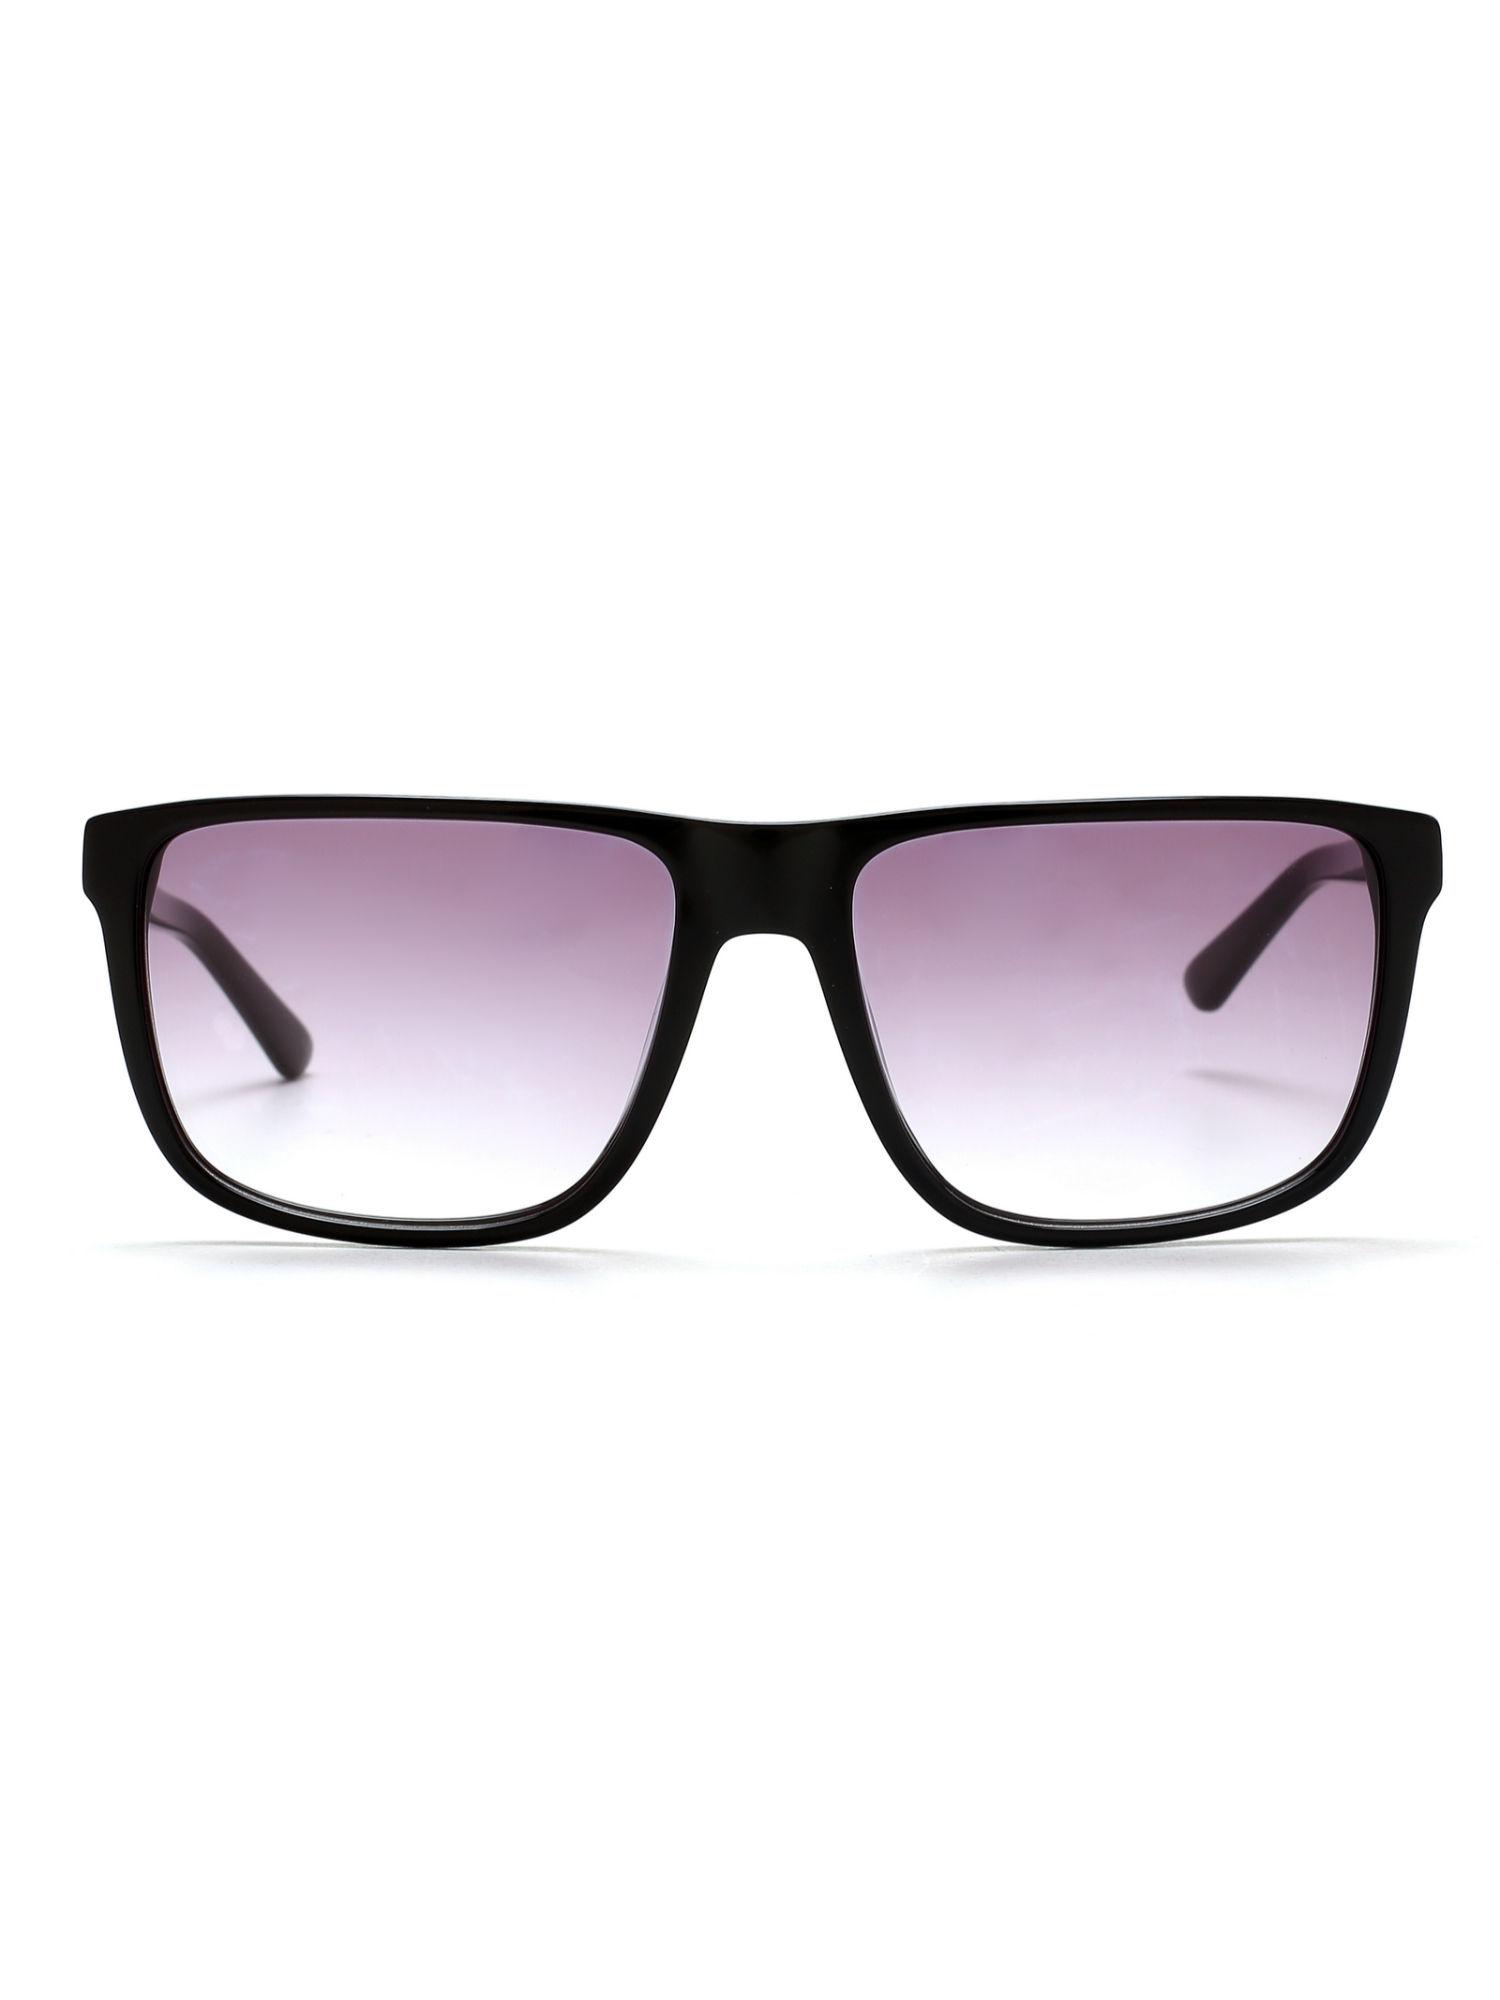 rectangle sunglasses with purple lens for men